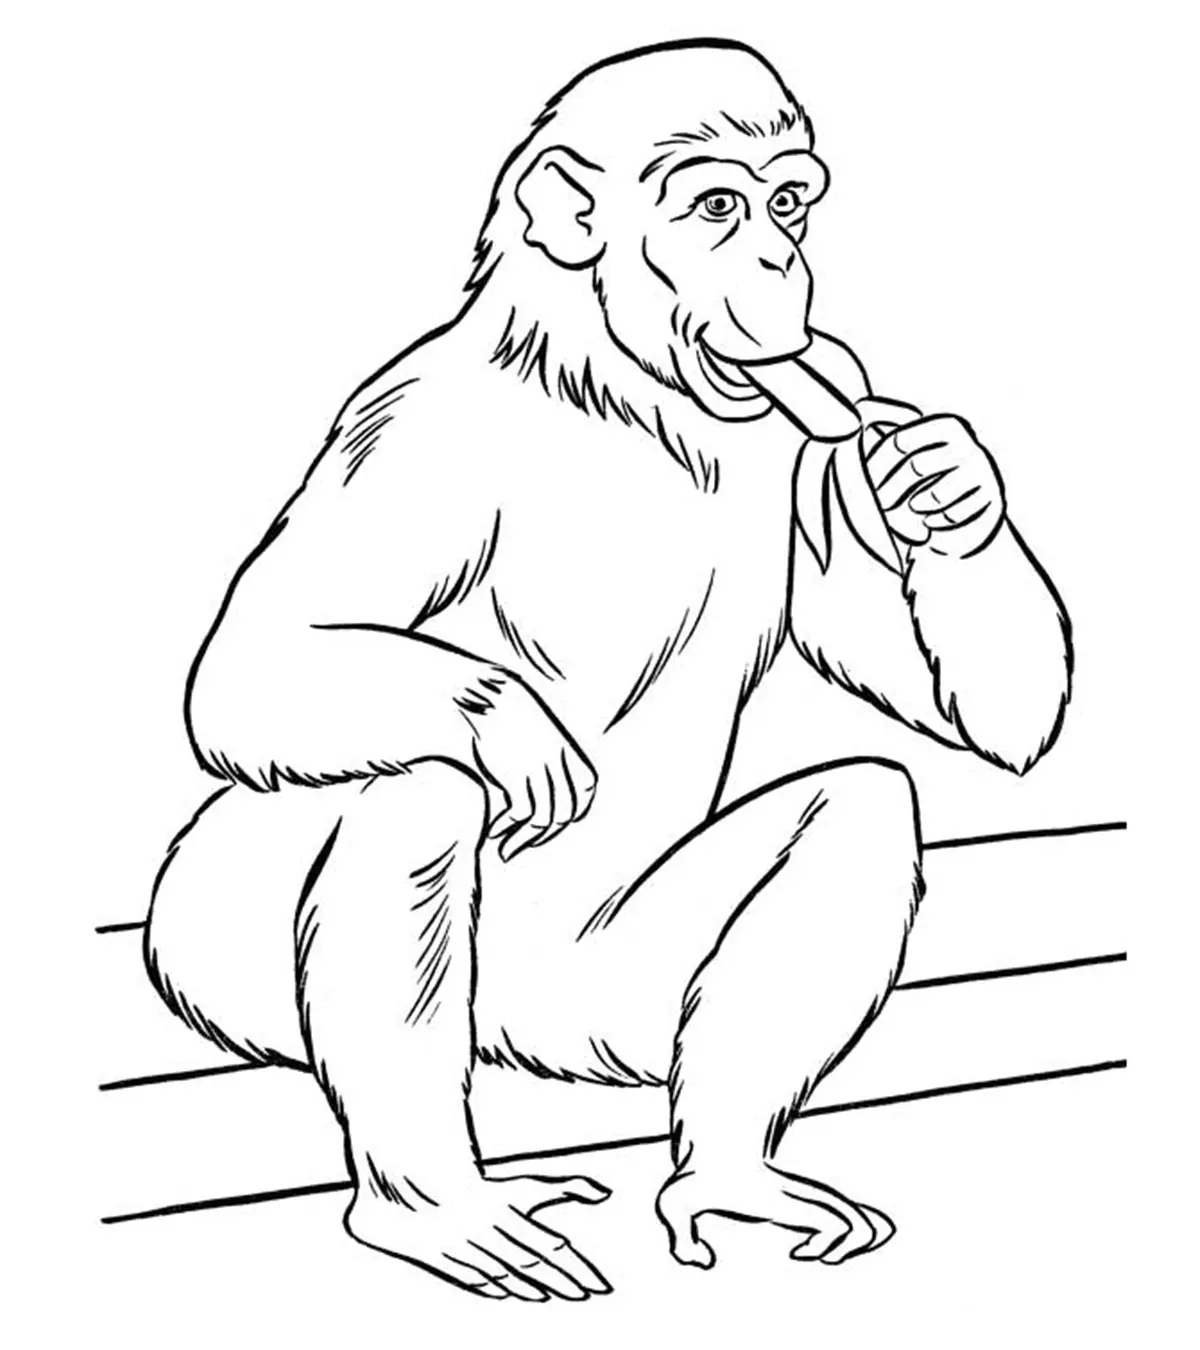 25 Interesting Zoo Animals Coloring Pages For Your Little Ones